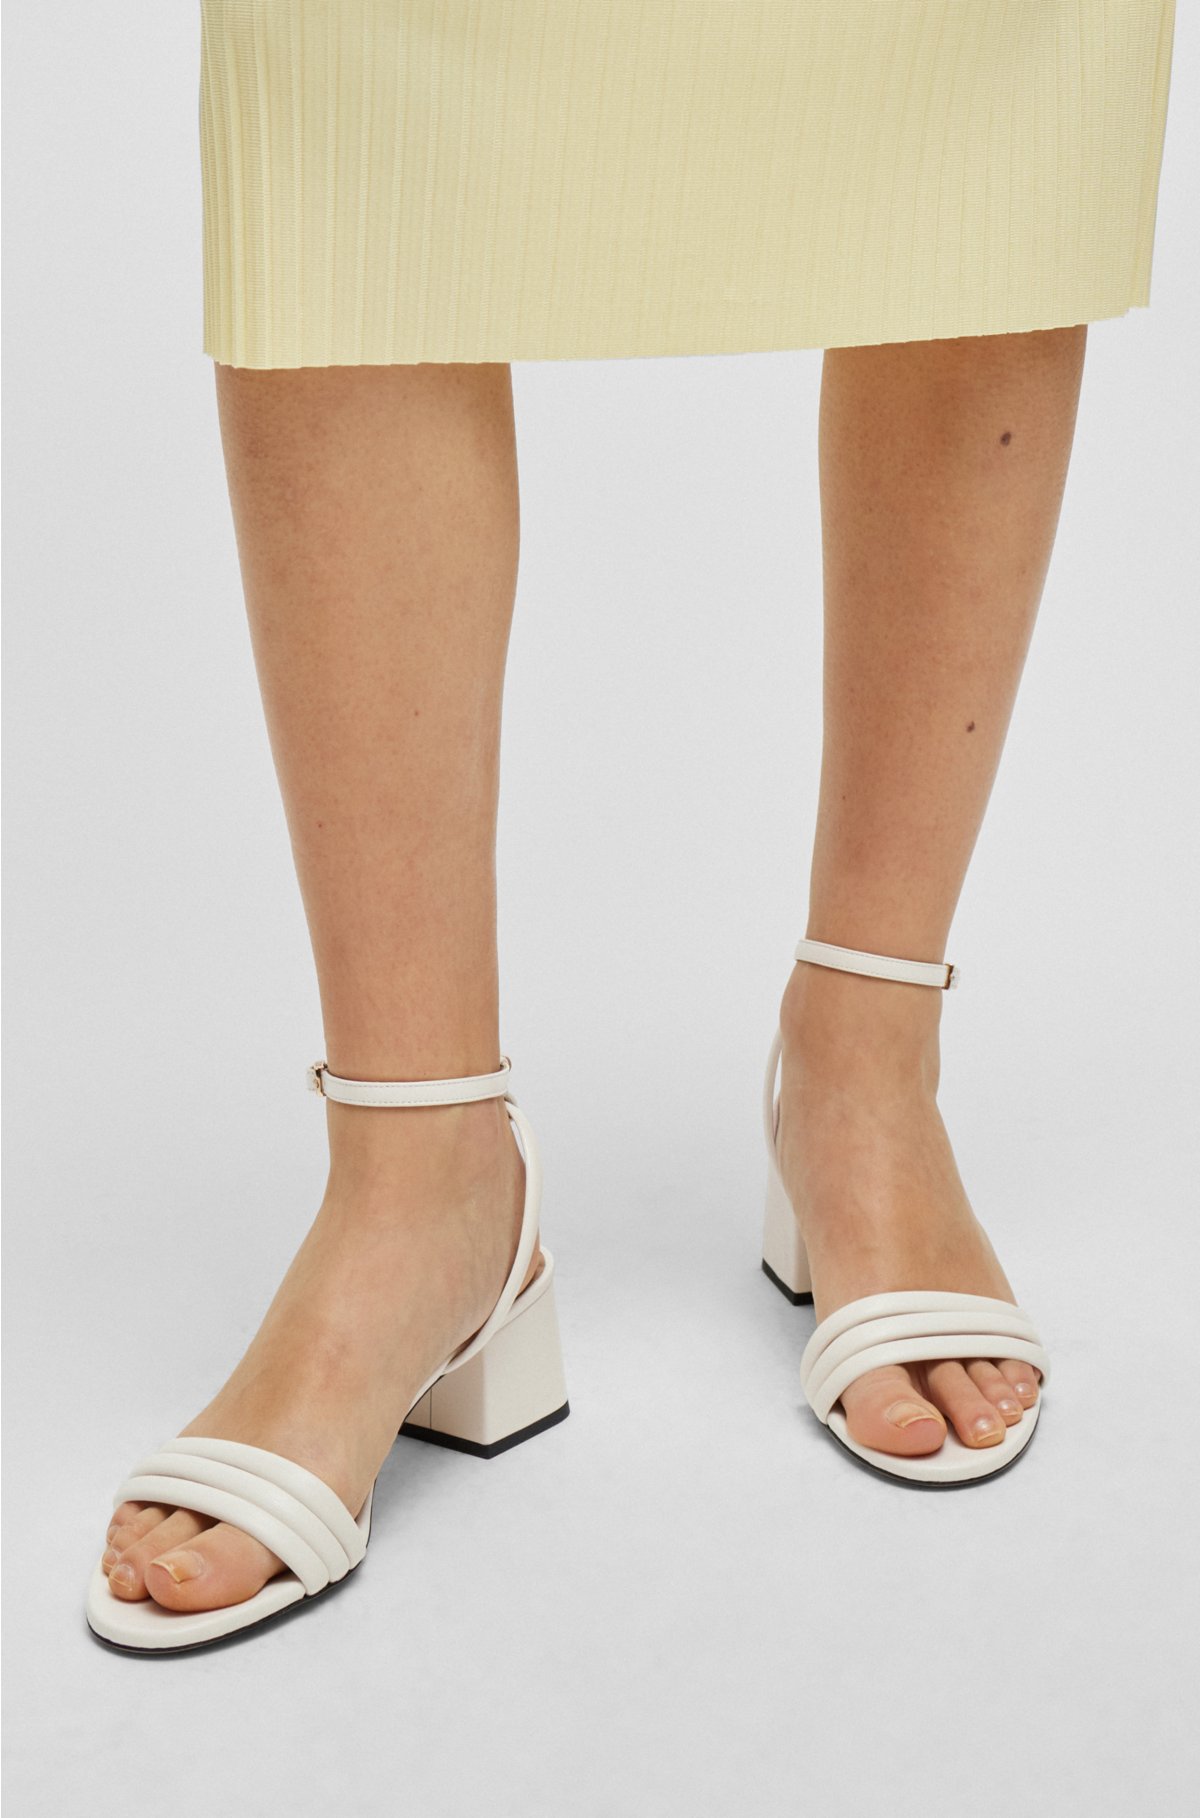 Padded-strap sandals with block heel, White